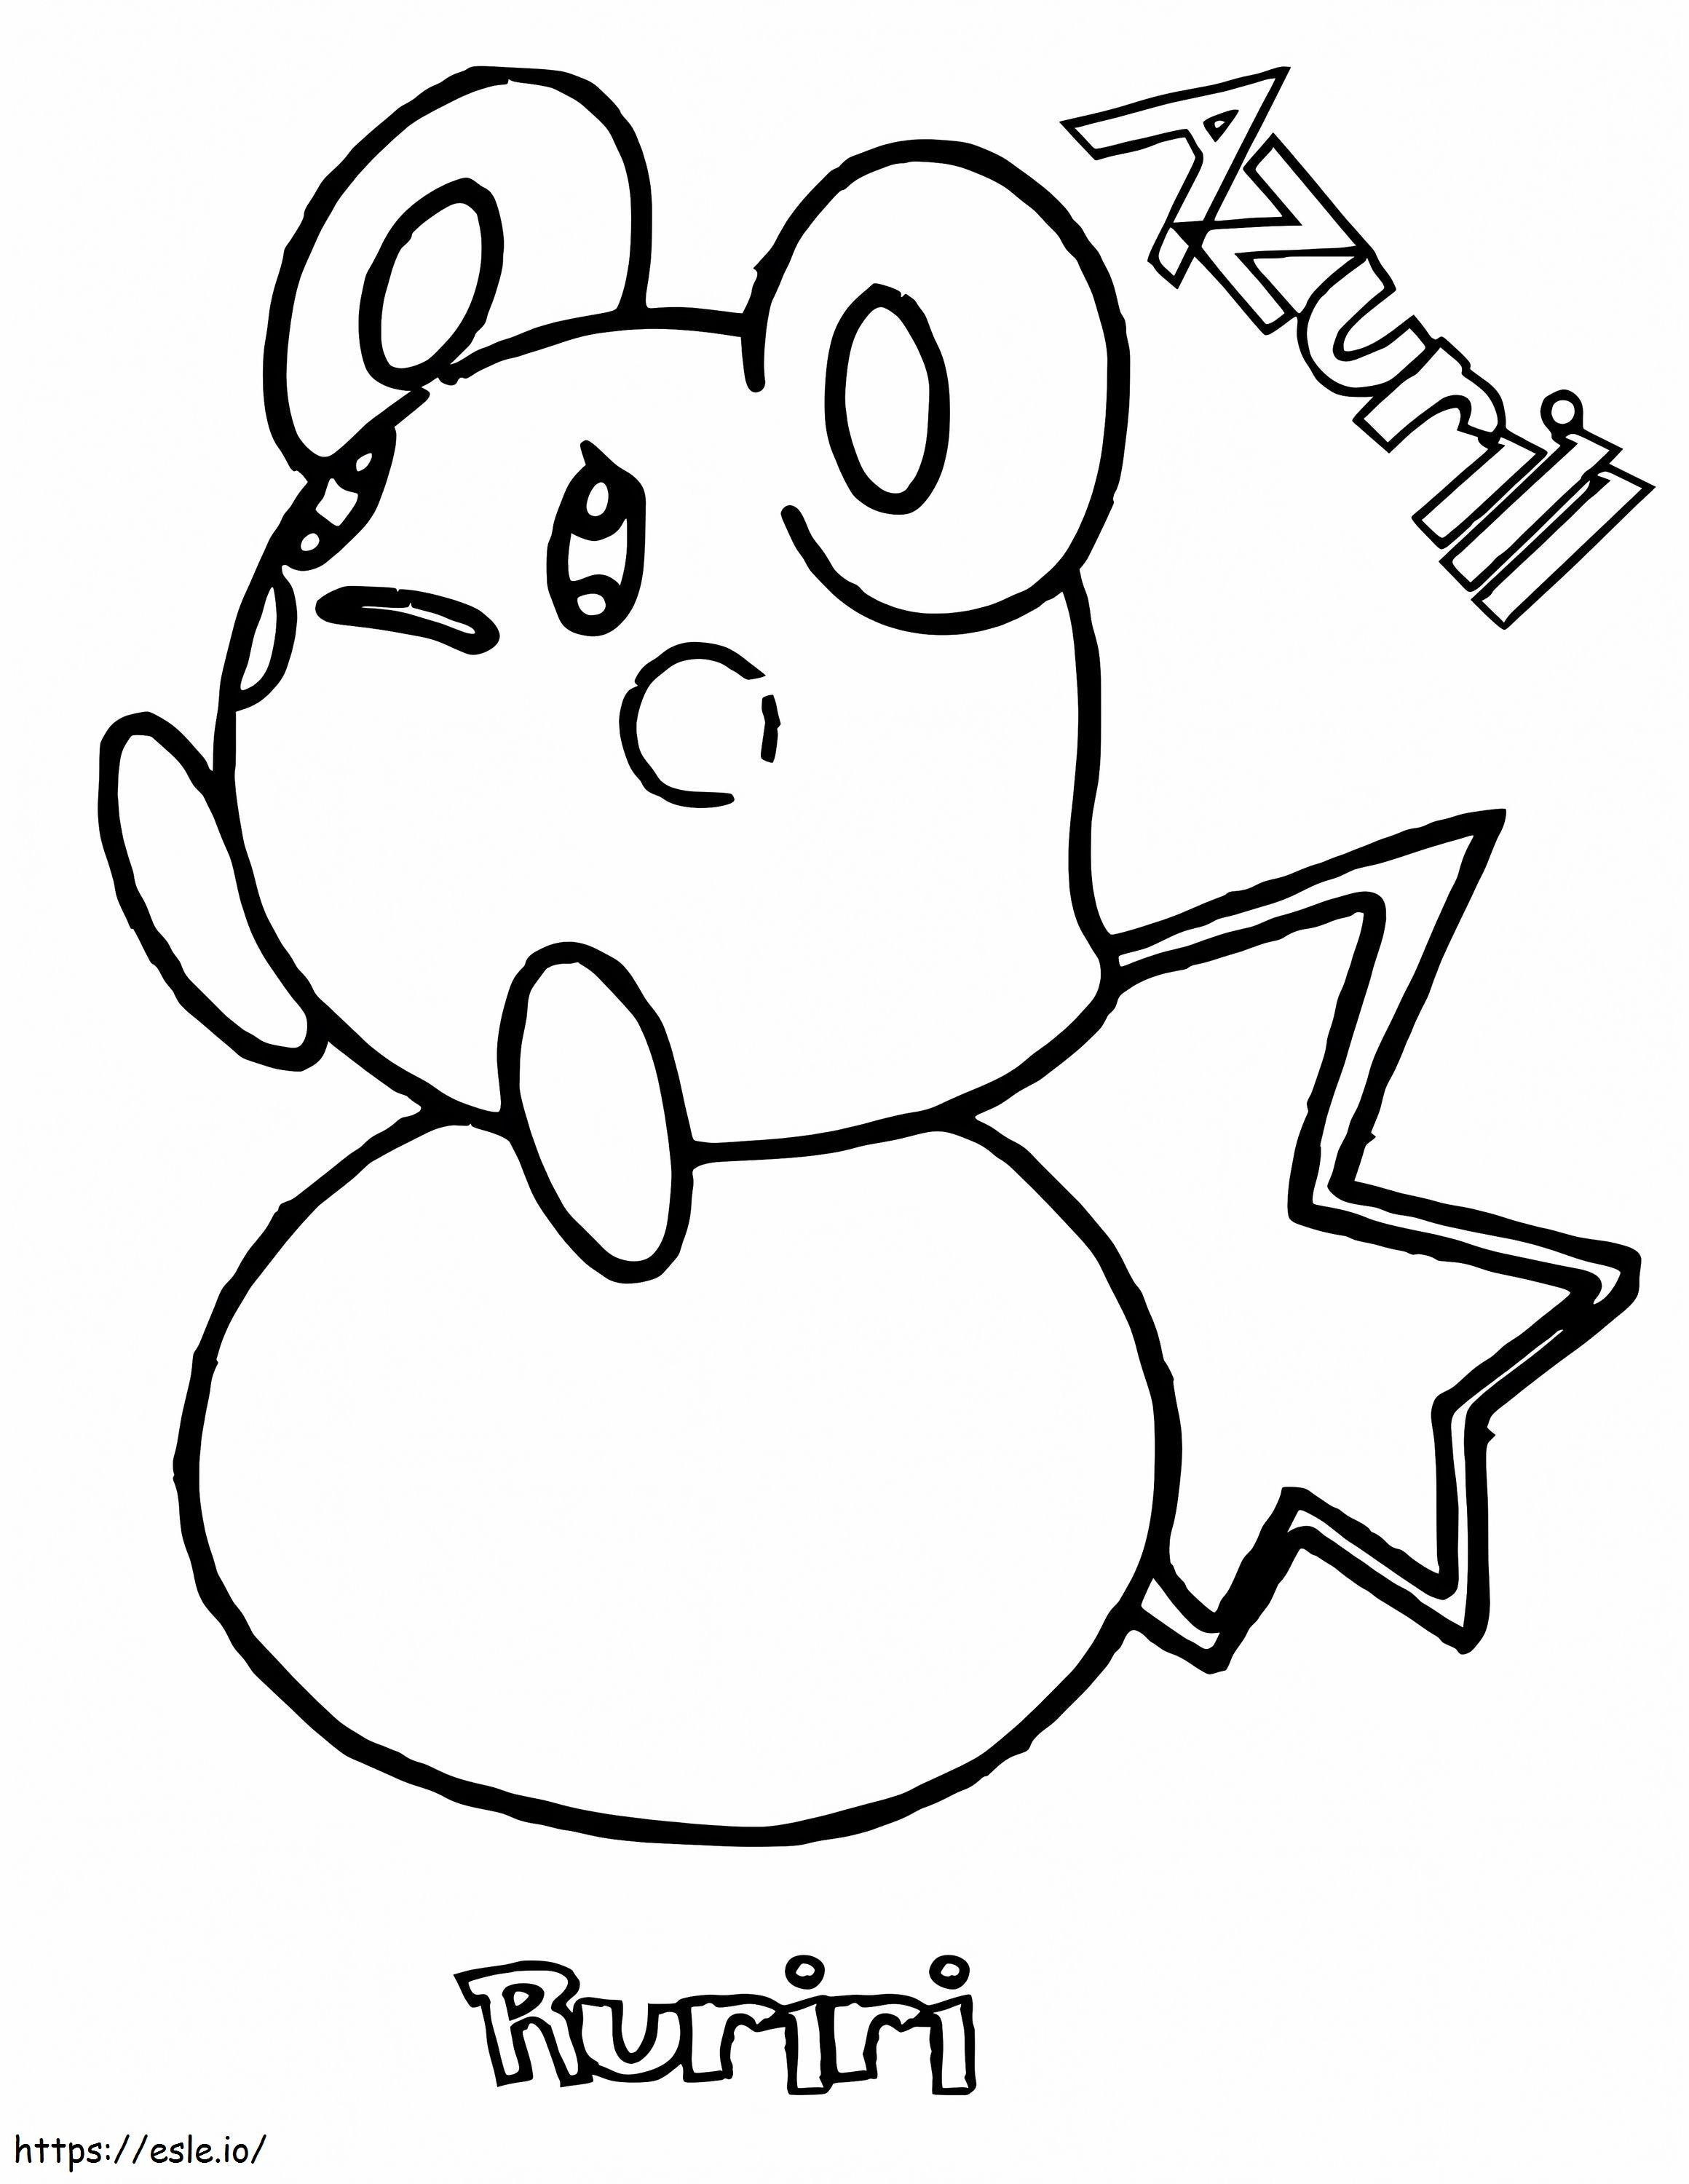 Marill 6 coloring page